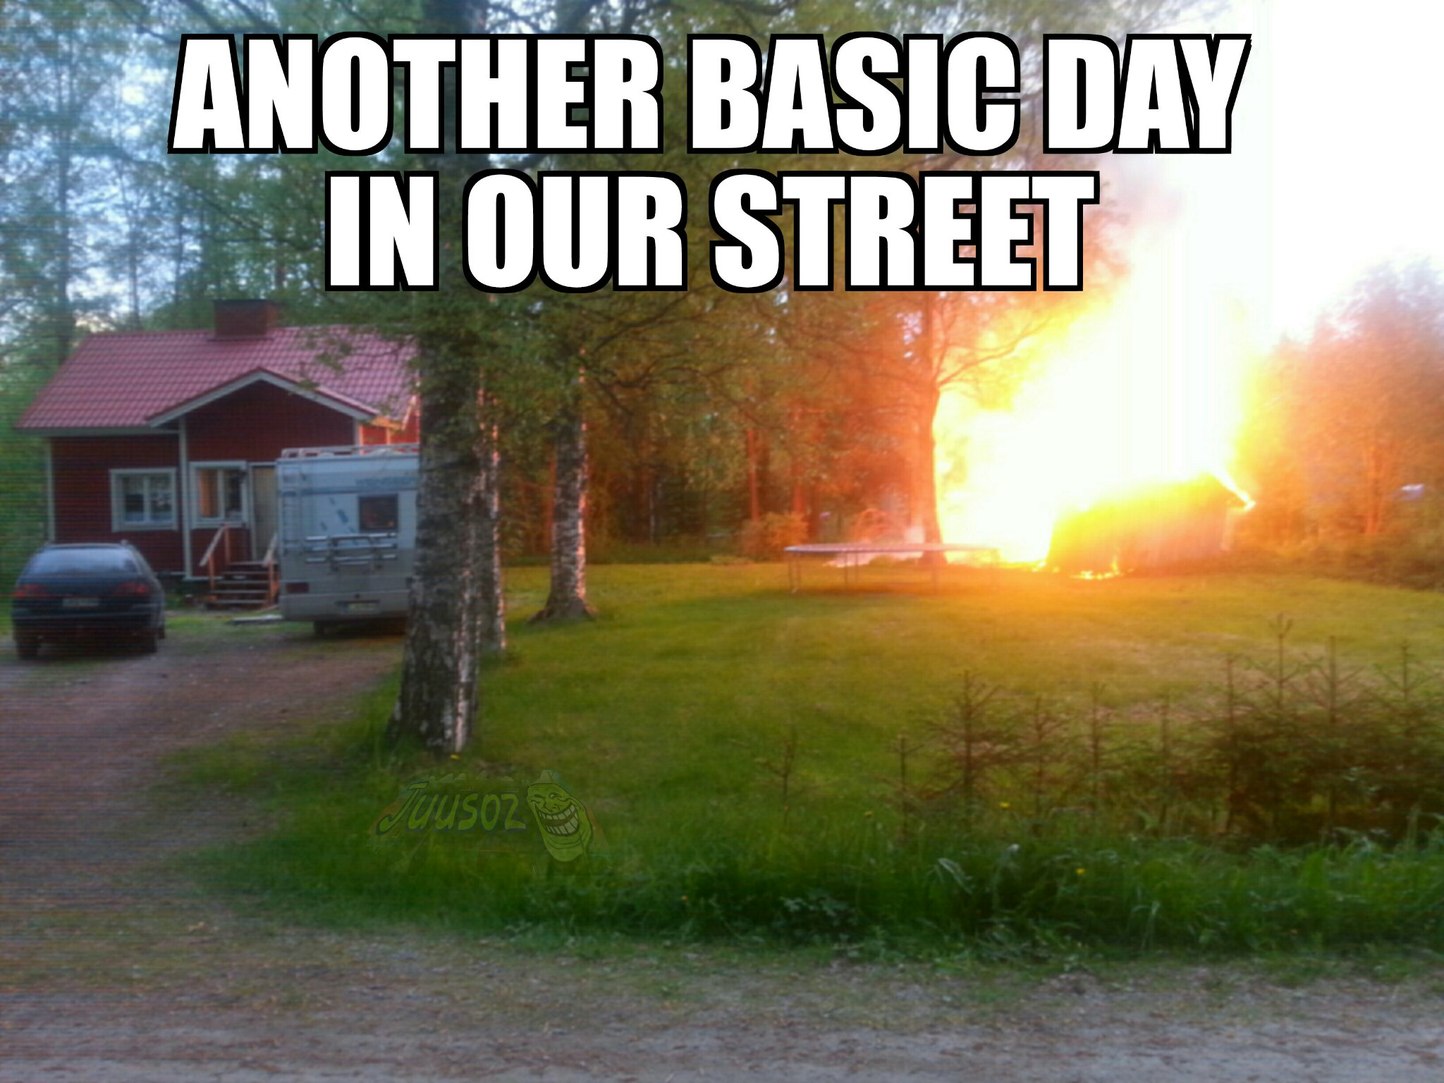 This is the fifth time emergency services have visited our street because of our neighbour :| - meme